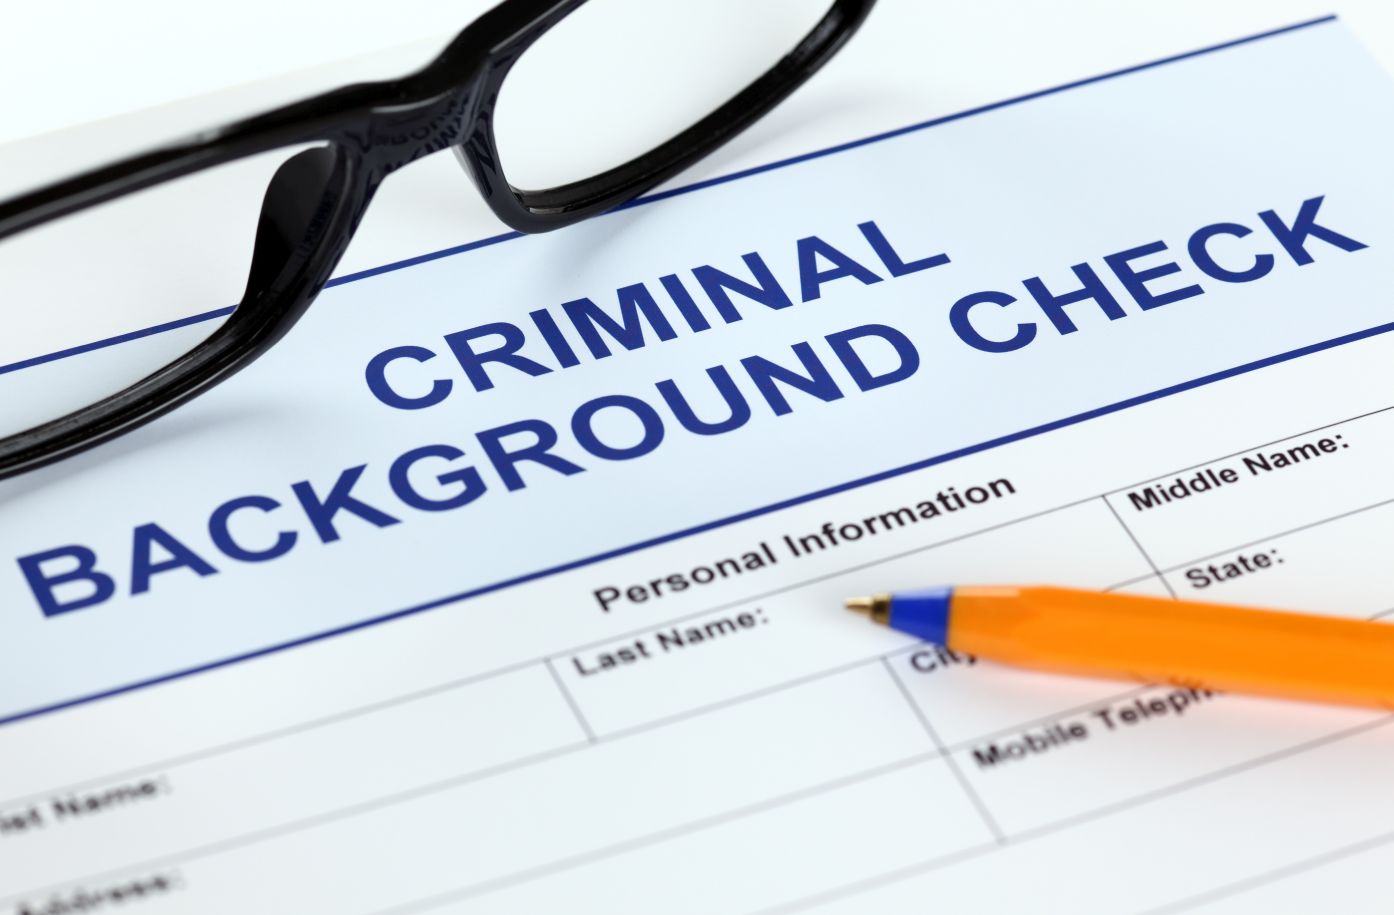 Criminal background check paperwork being filled out